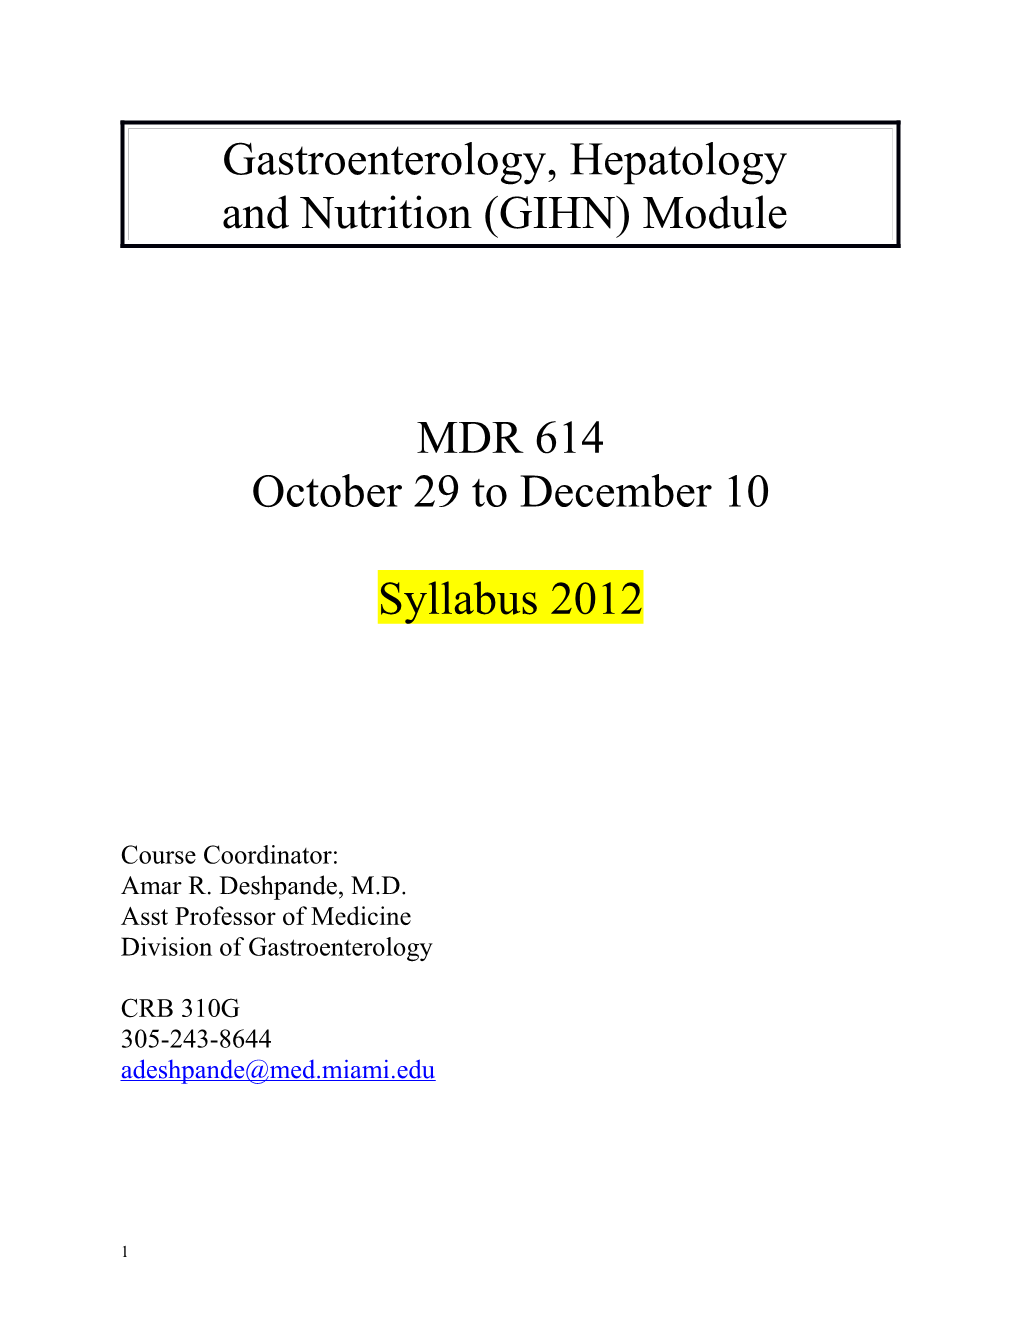 And Nutrition (GIHN) Module